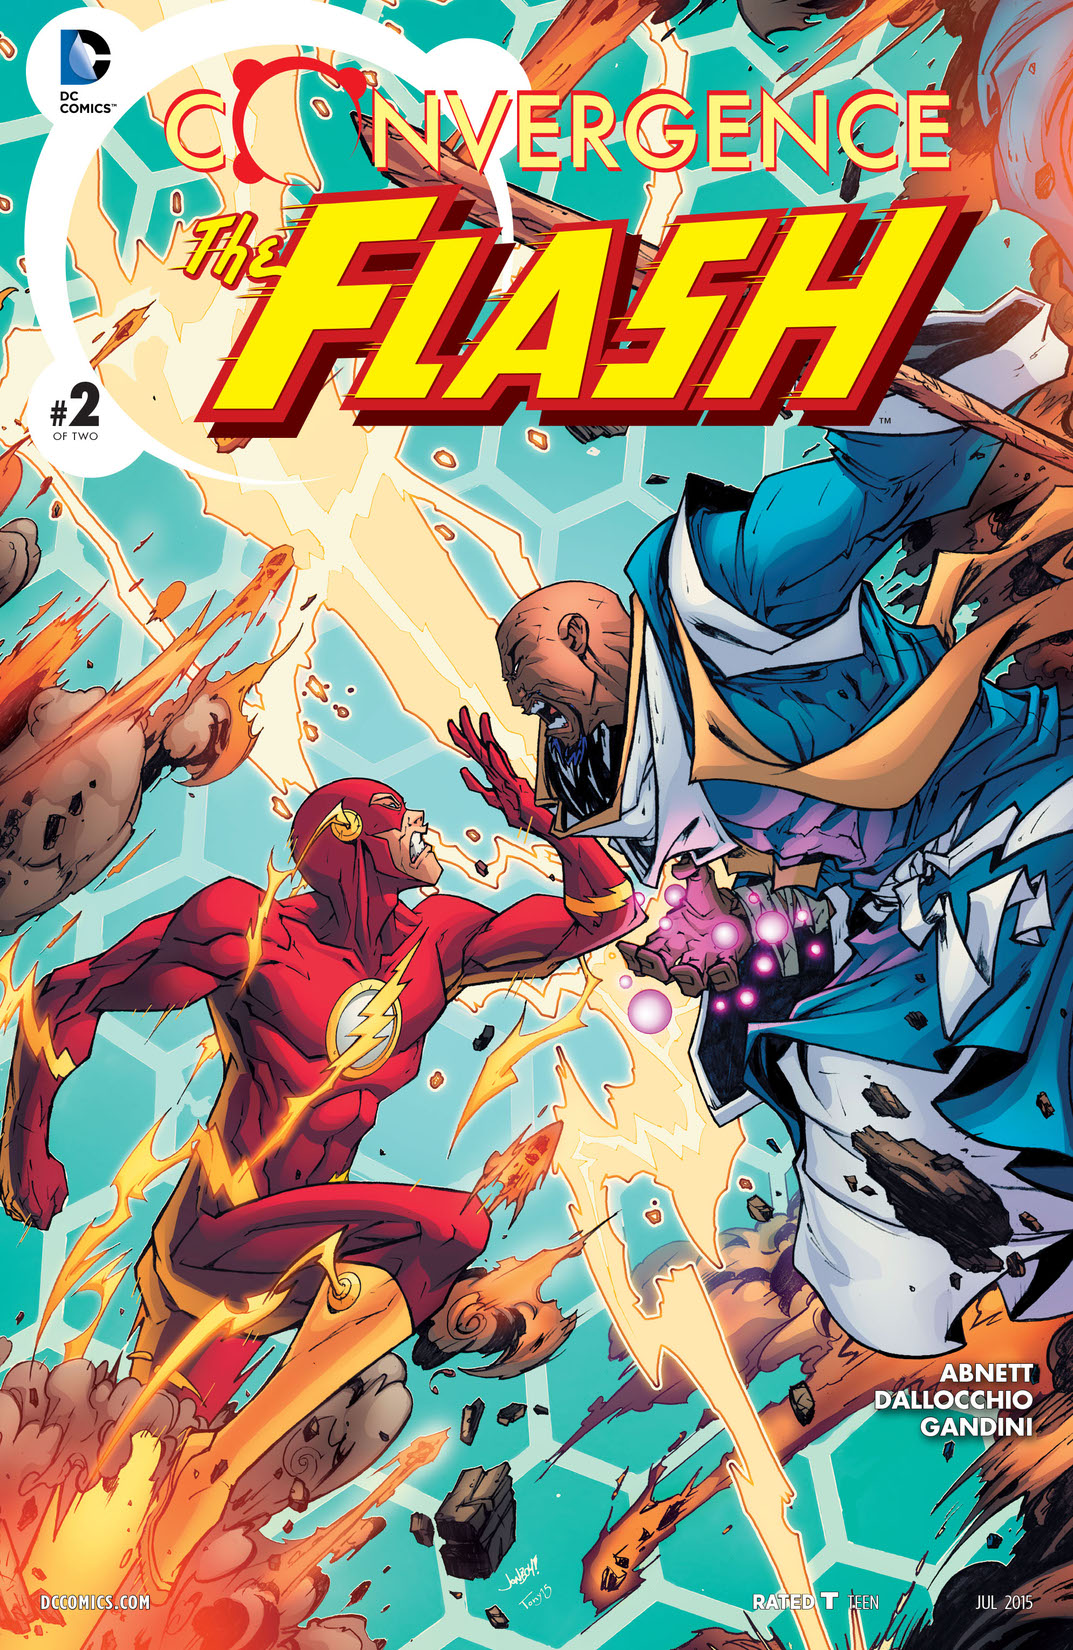 Convergence: Flash #2 preview images